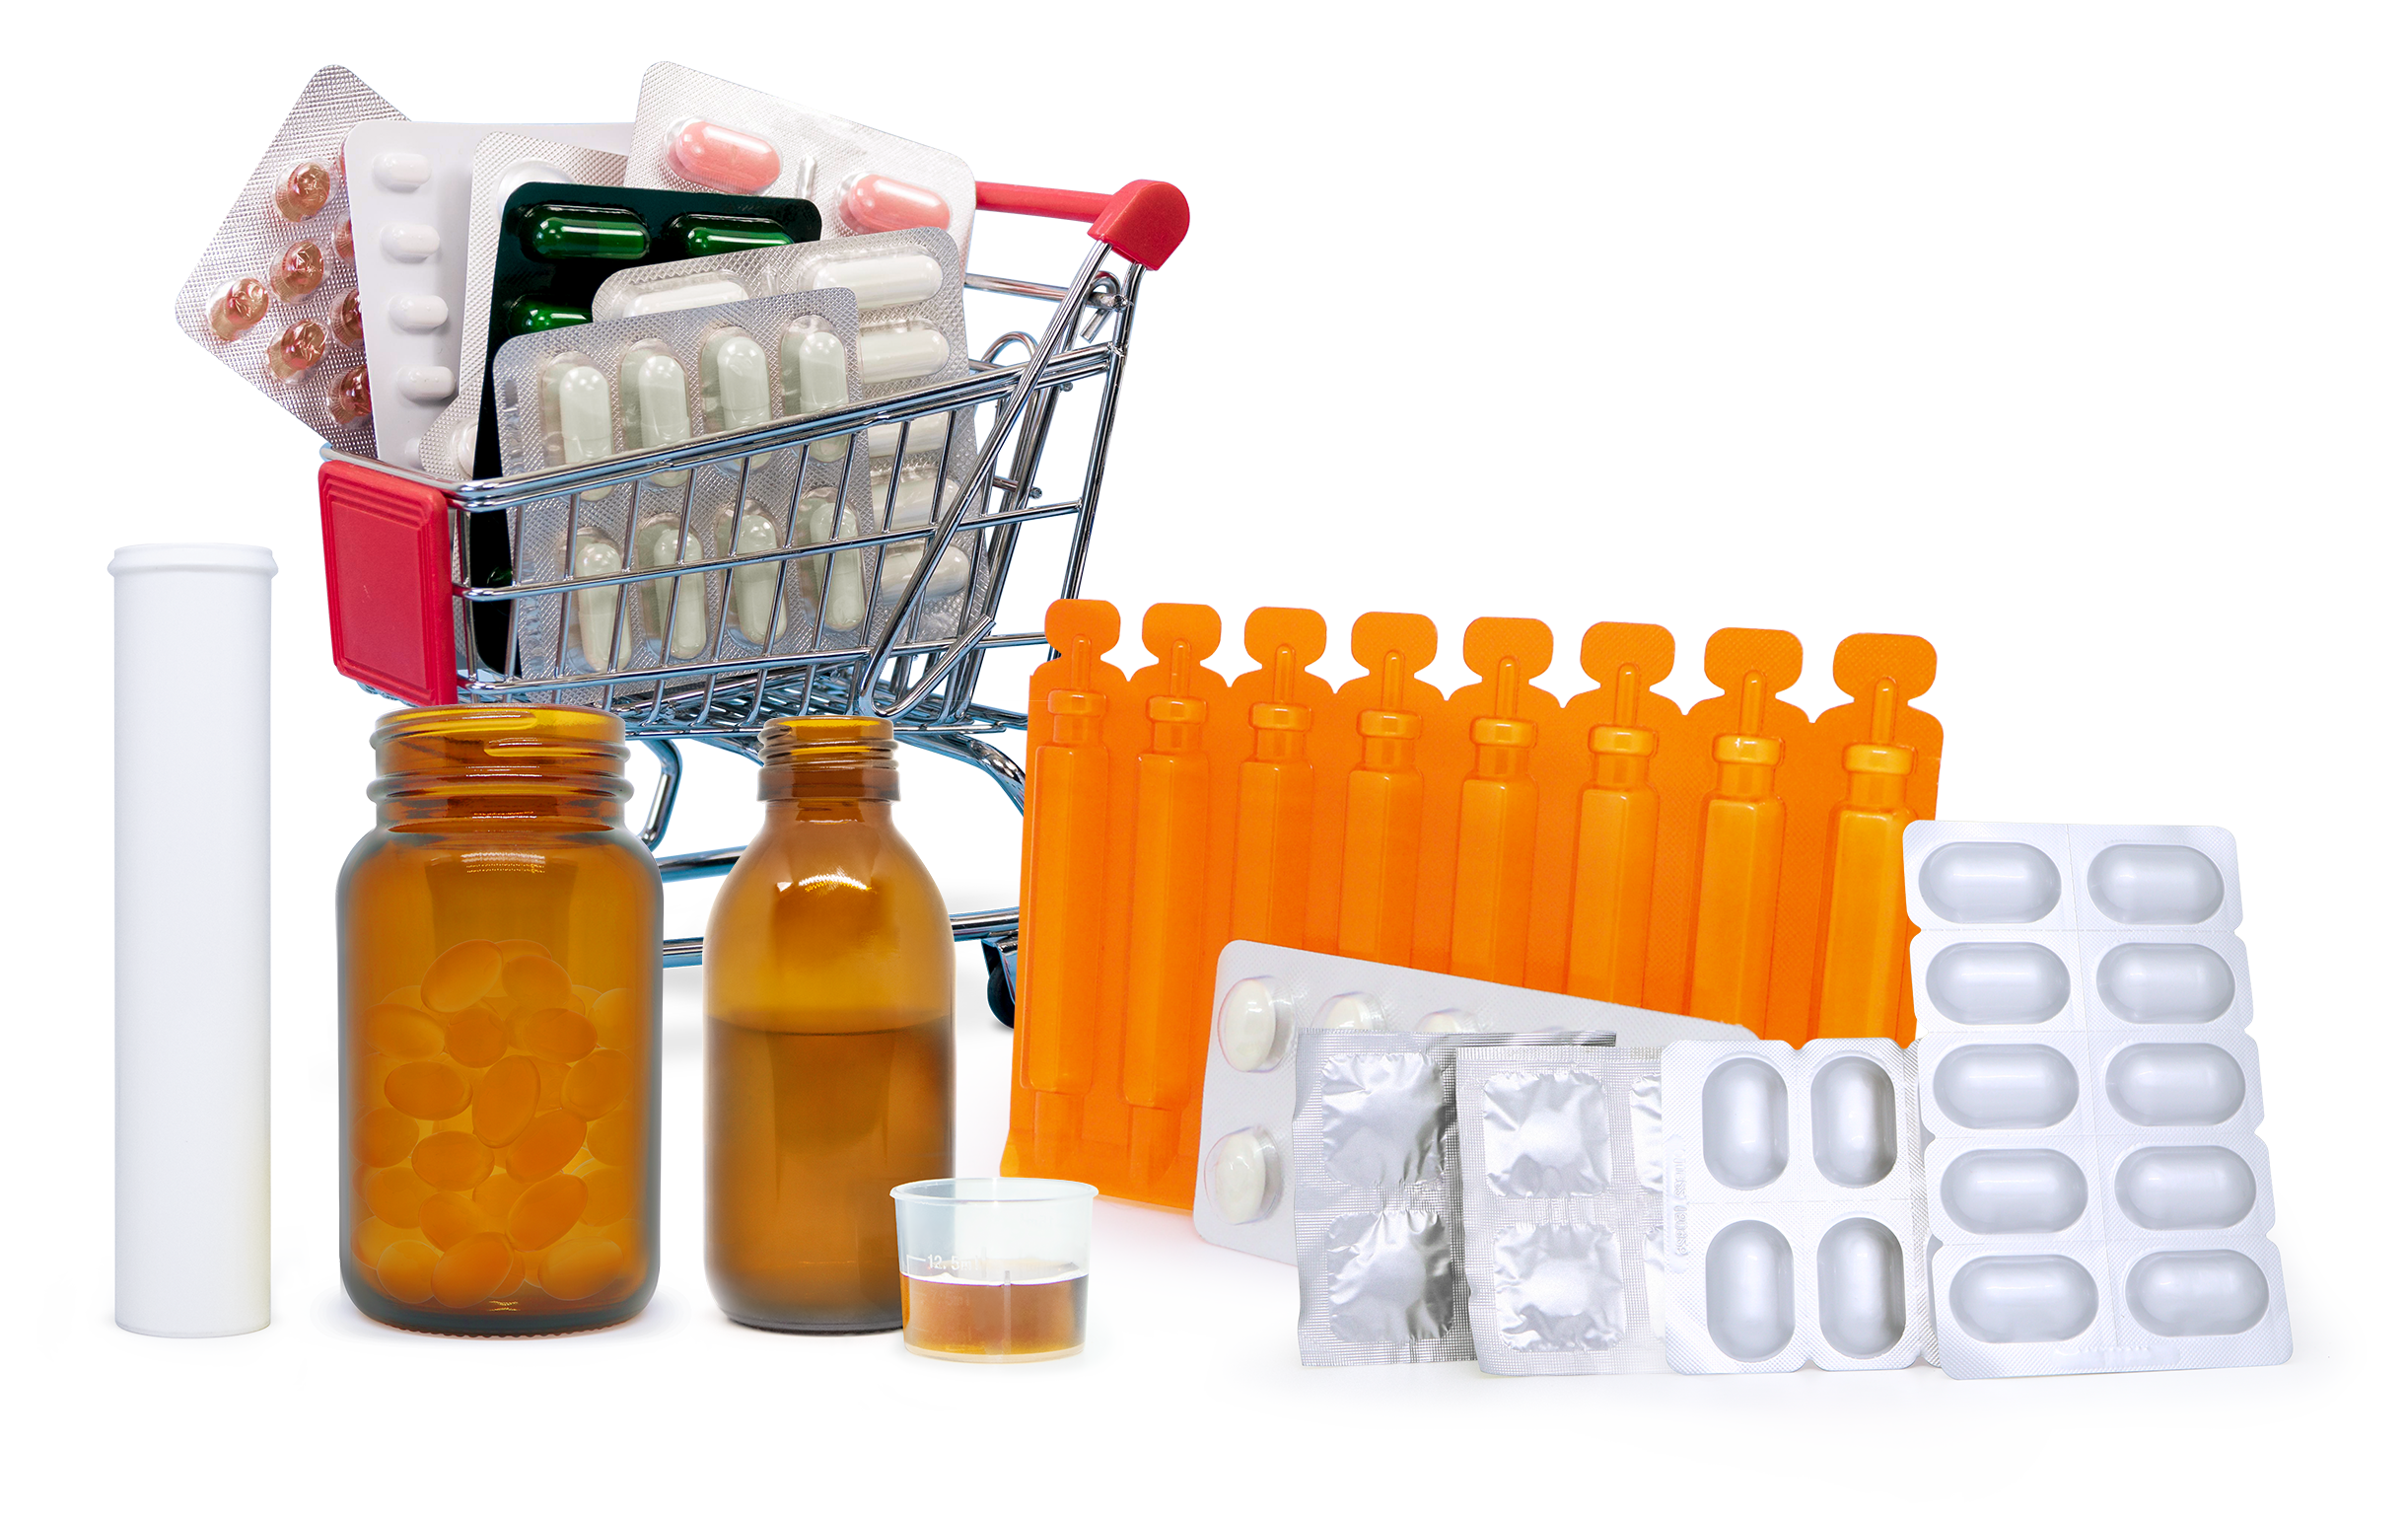 Some specialized terms about pharmaceutical Primary Packaging